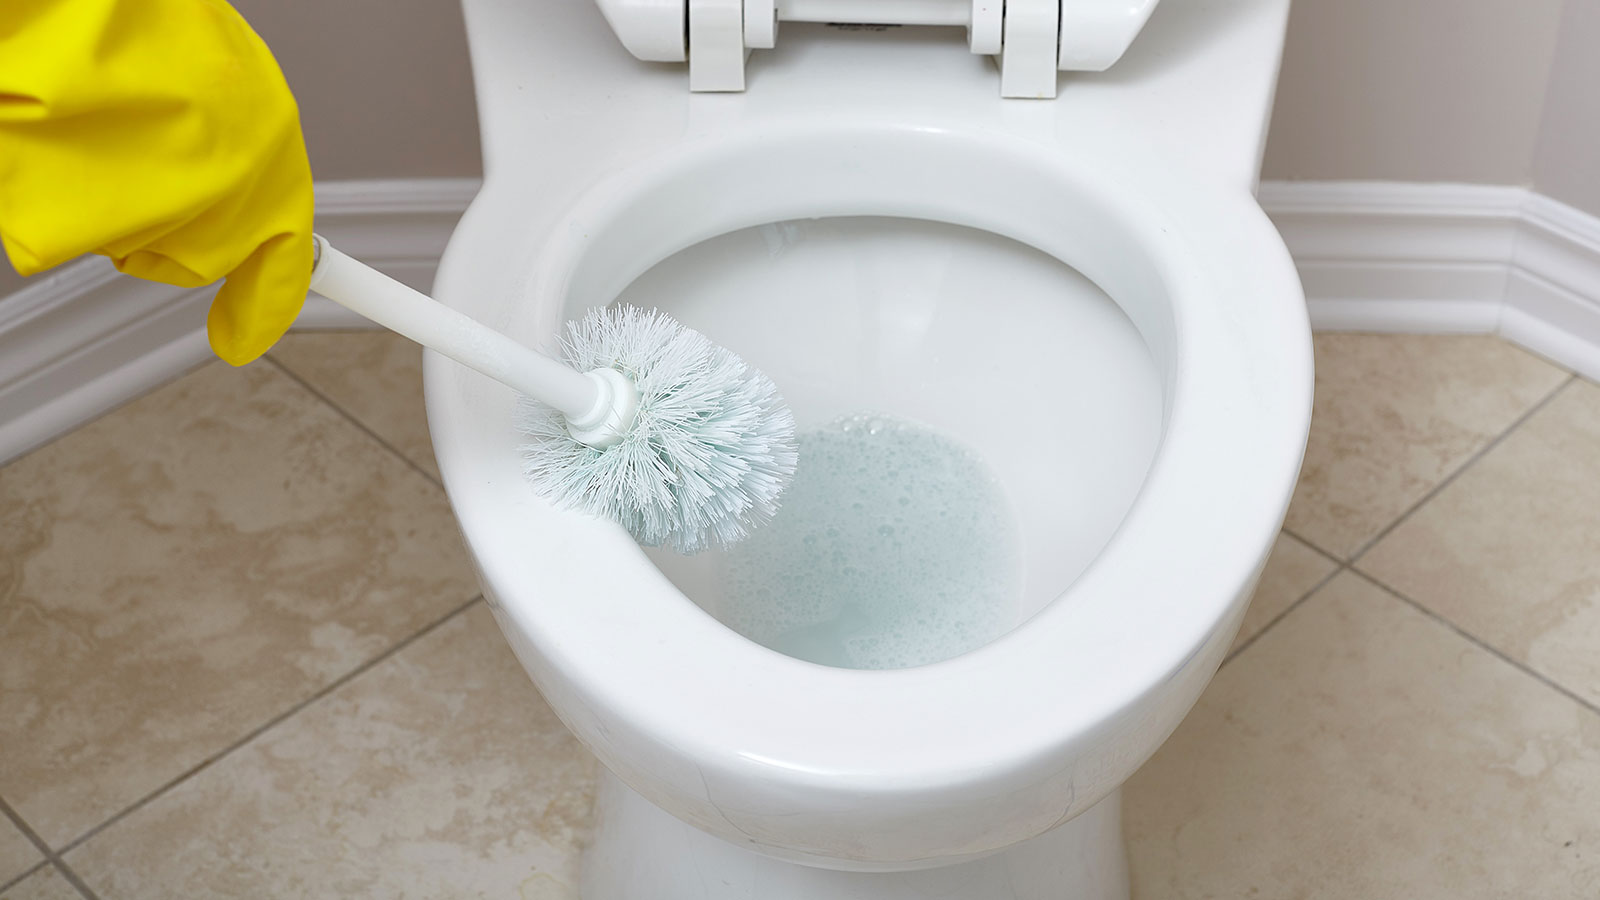 How To Get Poop Stains Off Of Toilet Seat